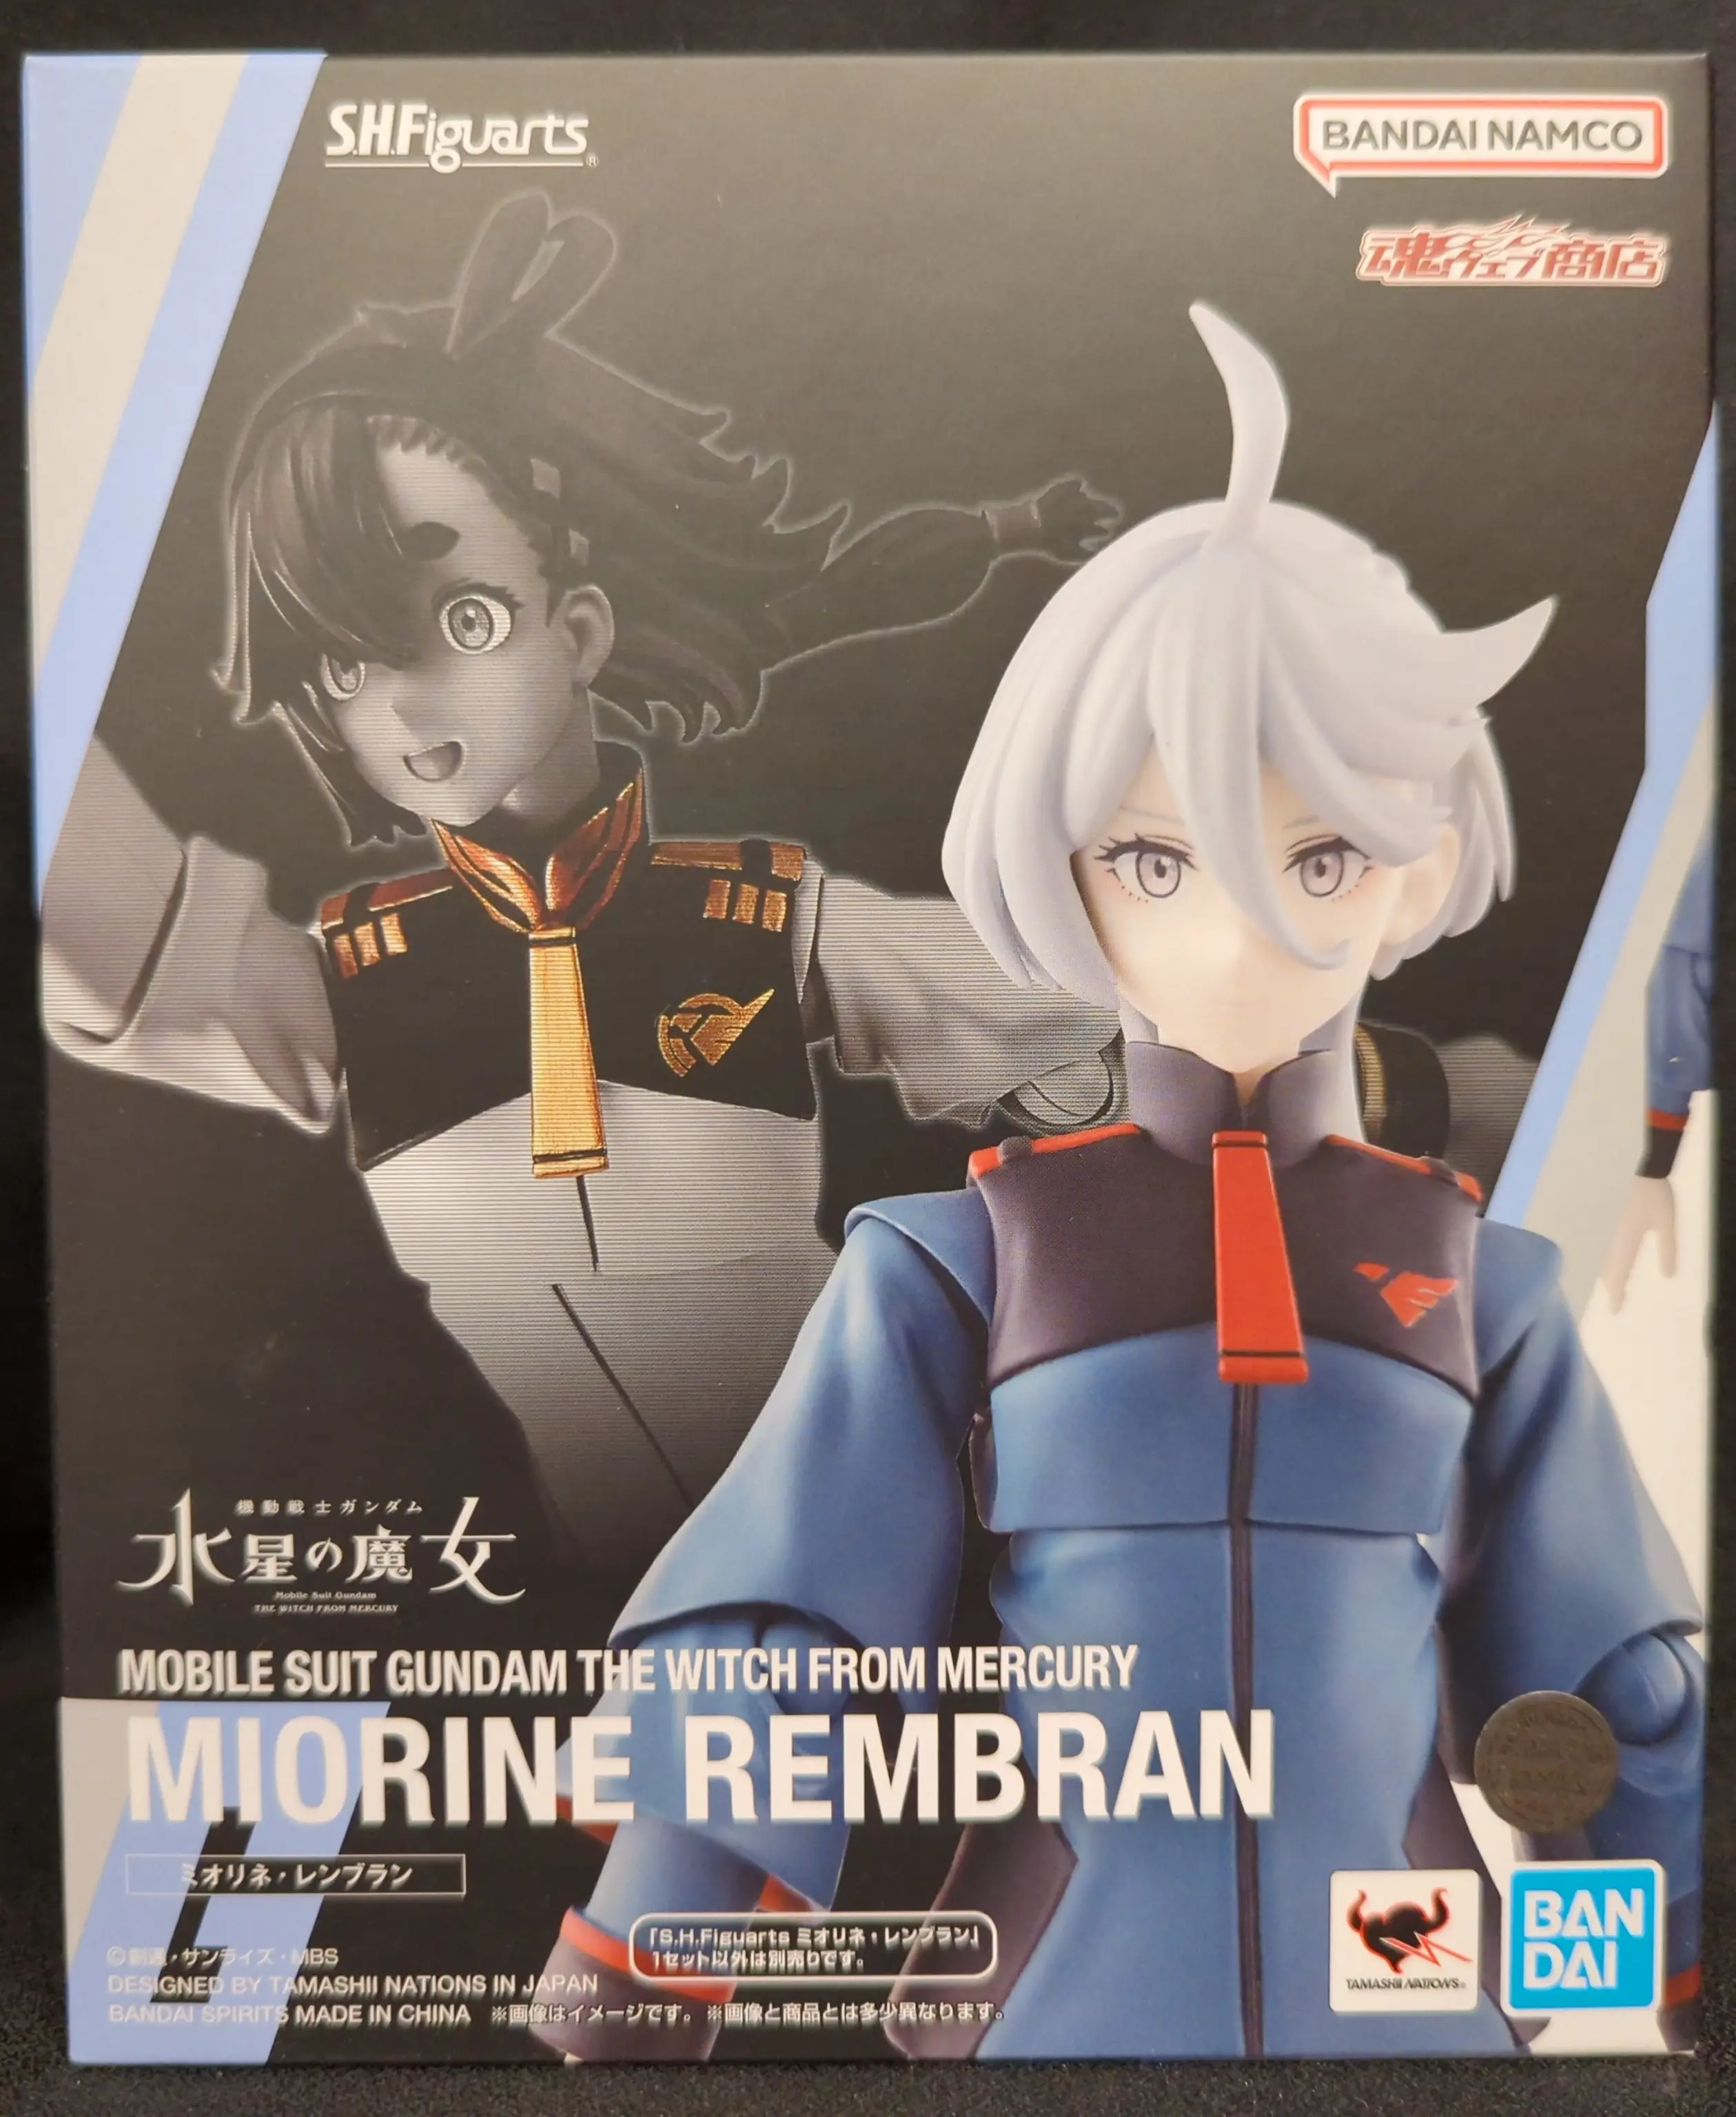 S.H.Figuarts - Mobile Suit Gundam: The Witch from Mercury / Miorine Rembran